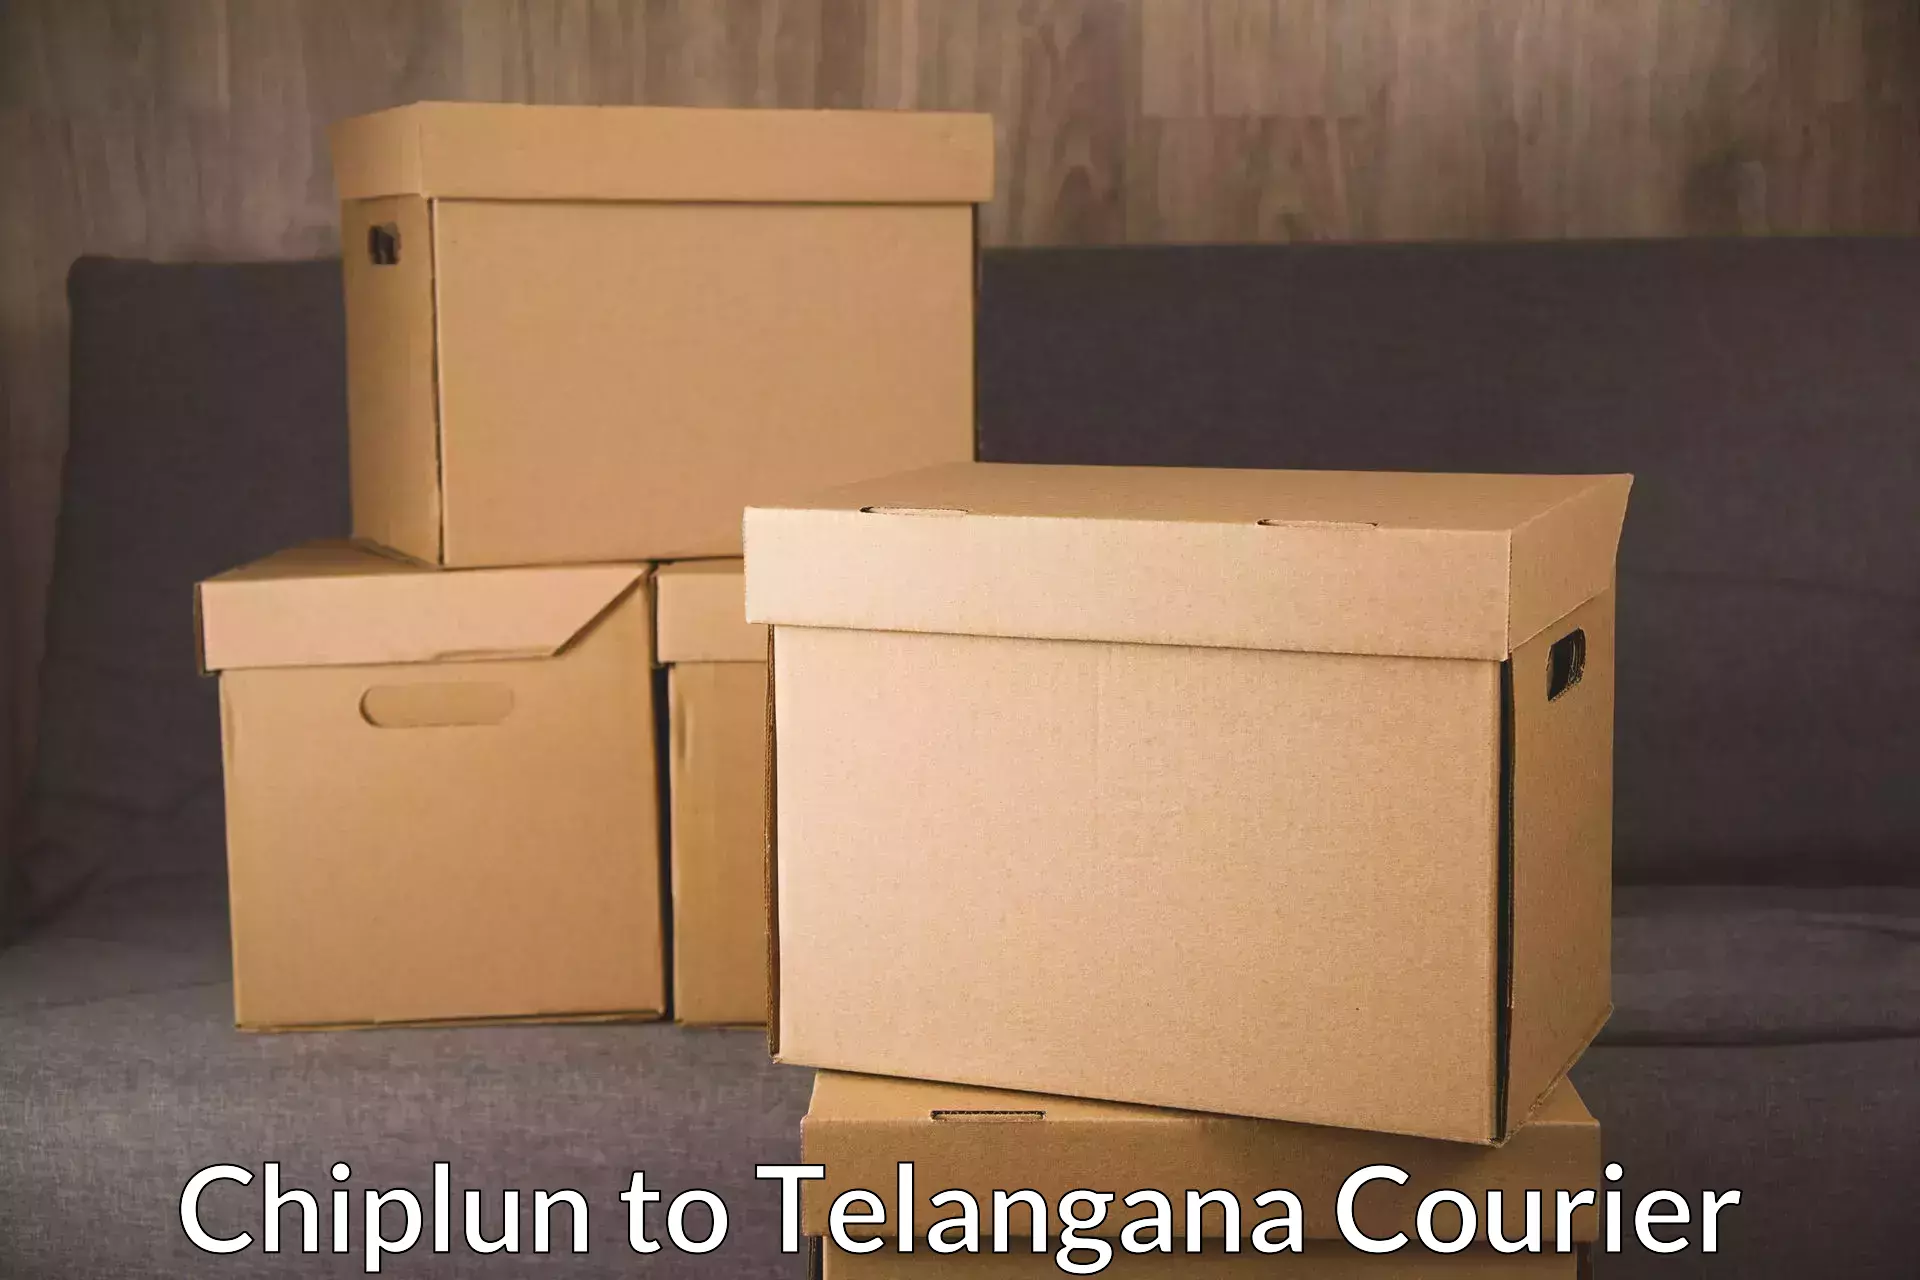 International courier networks Chiplun to Telangana